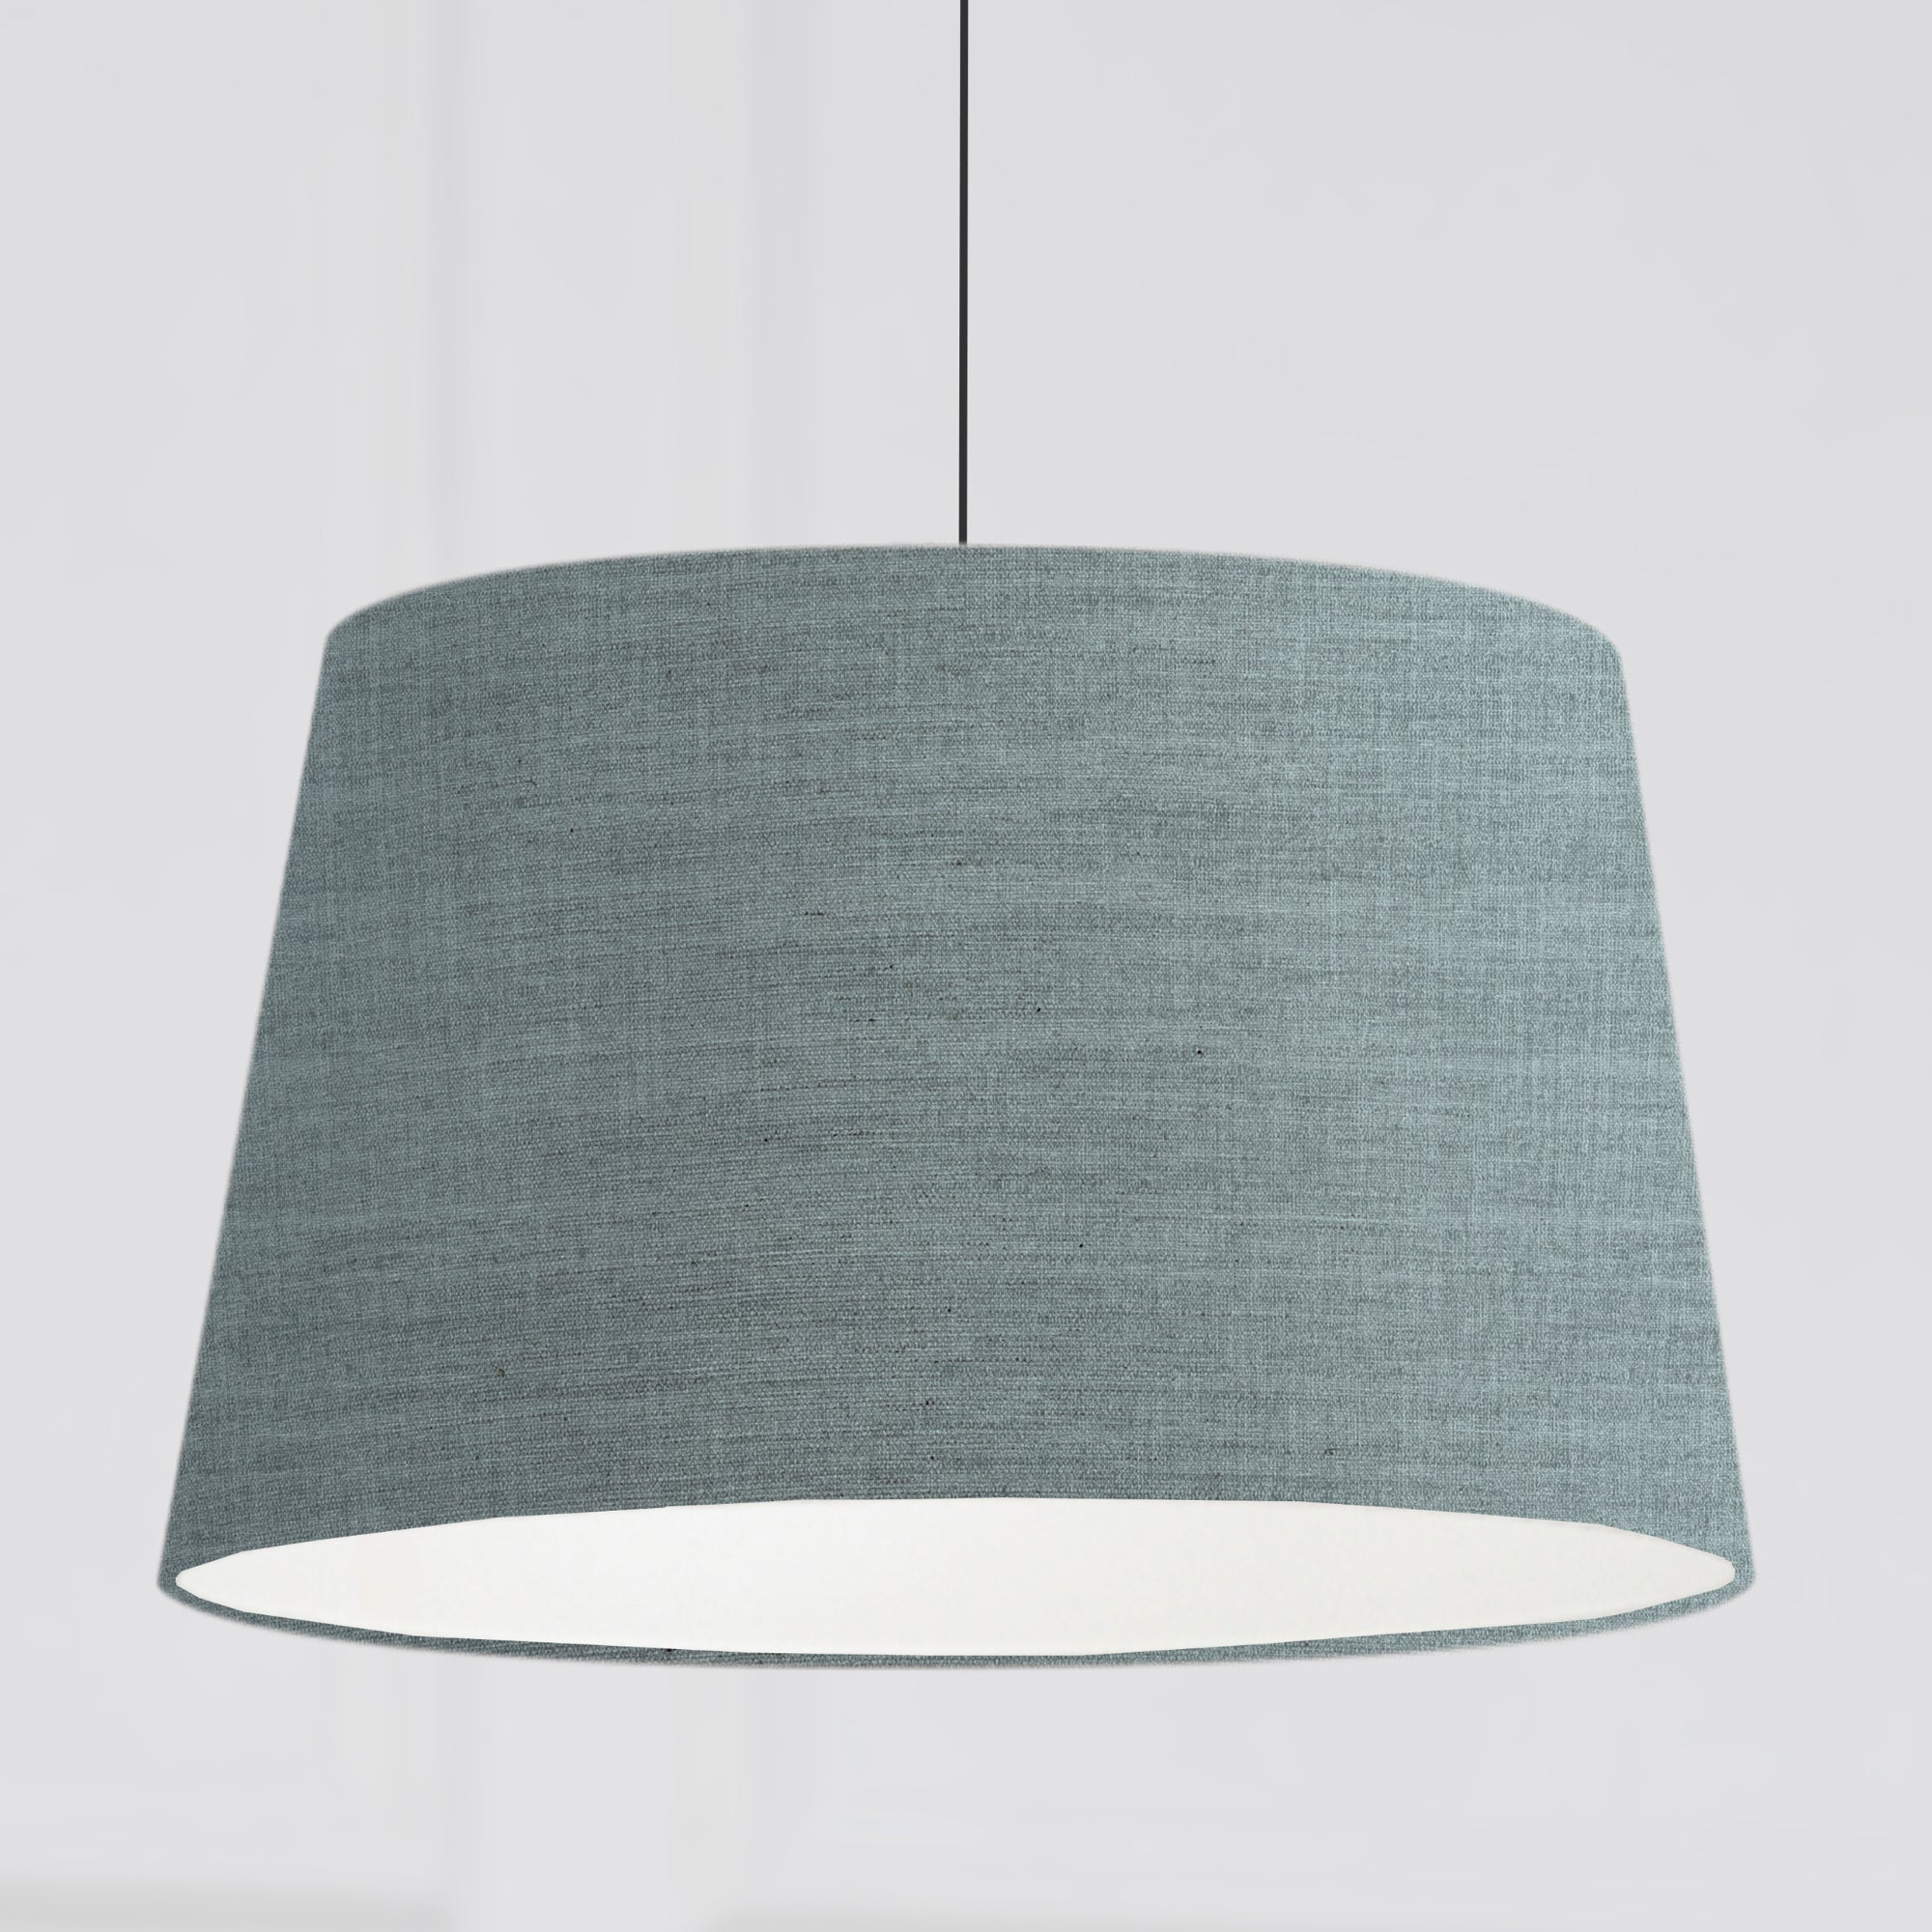 Textured Anna Tapered Lamp Shade Textured Anna Frost Grey